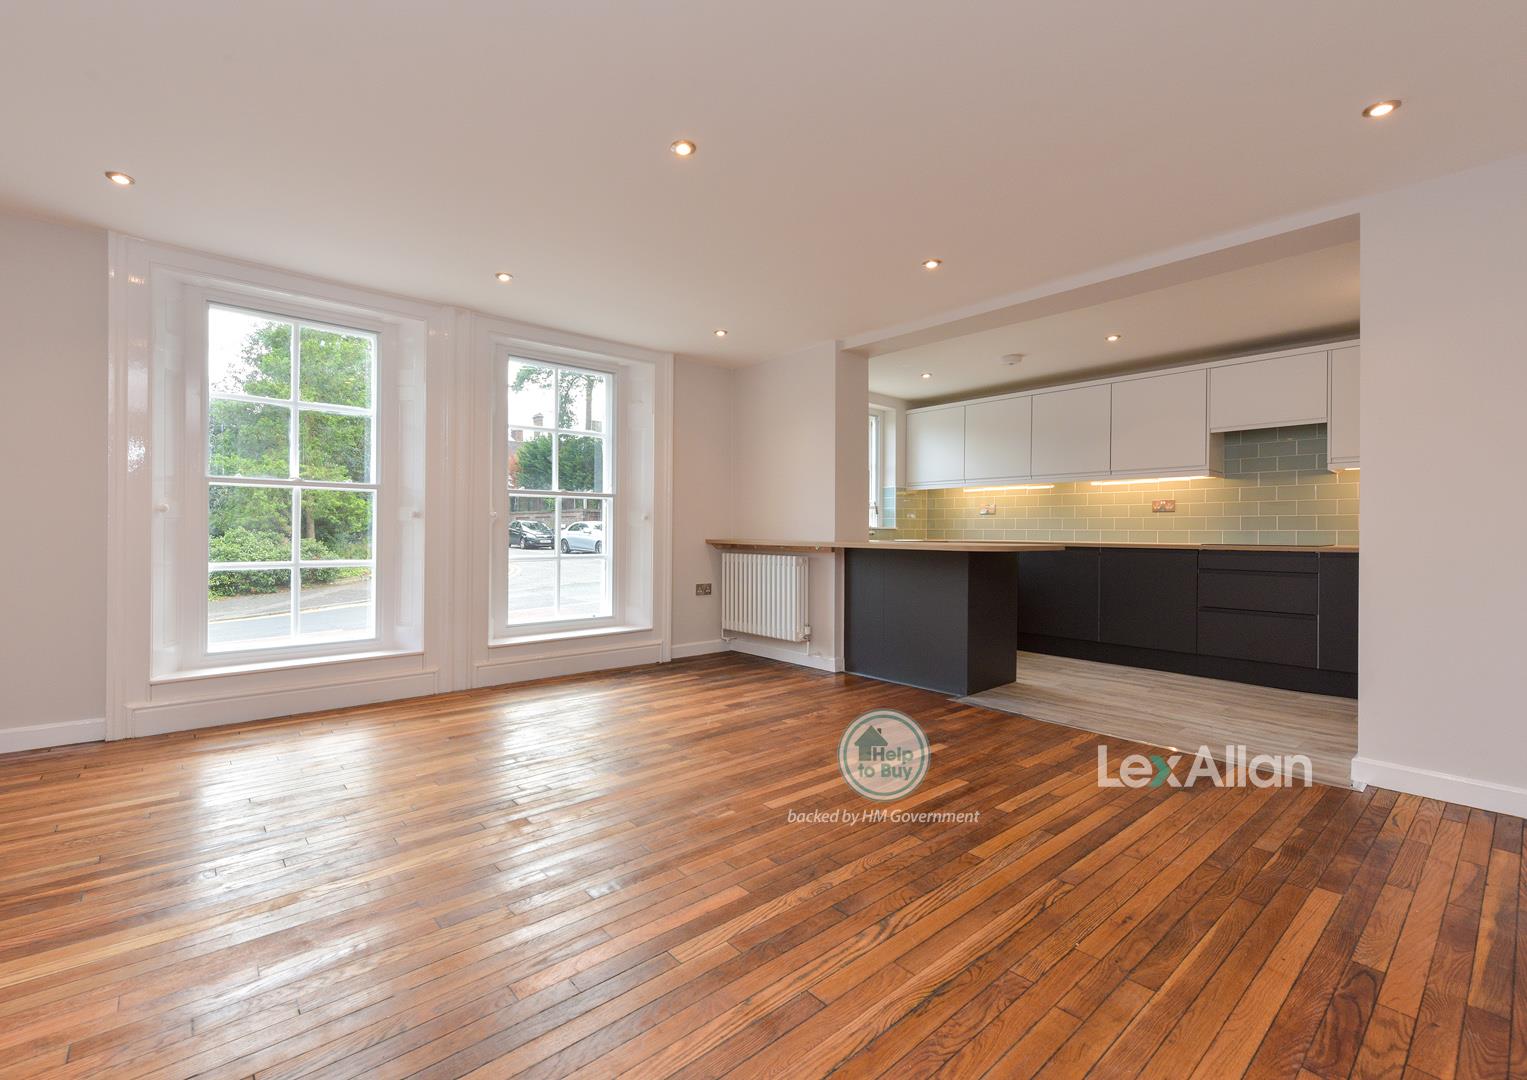 2 bed apartment for sale in Red Hill, Stourbridge - Property Image 1